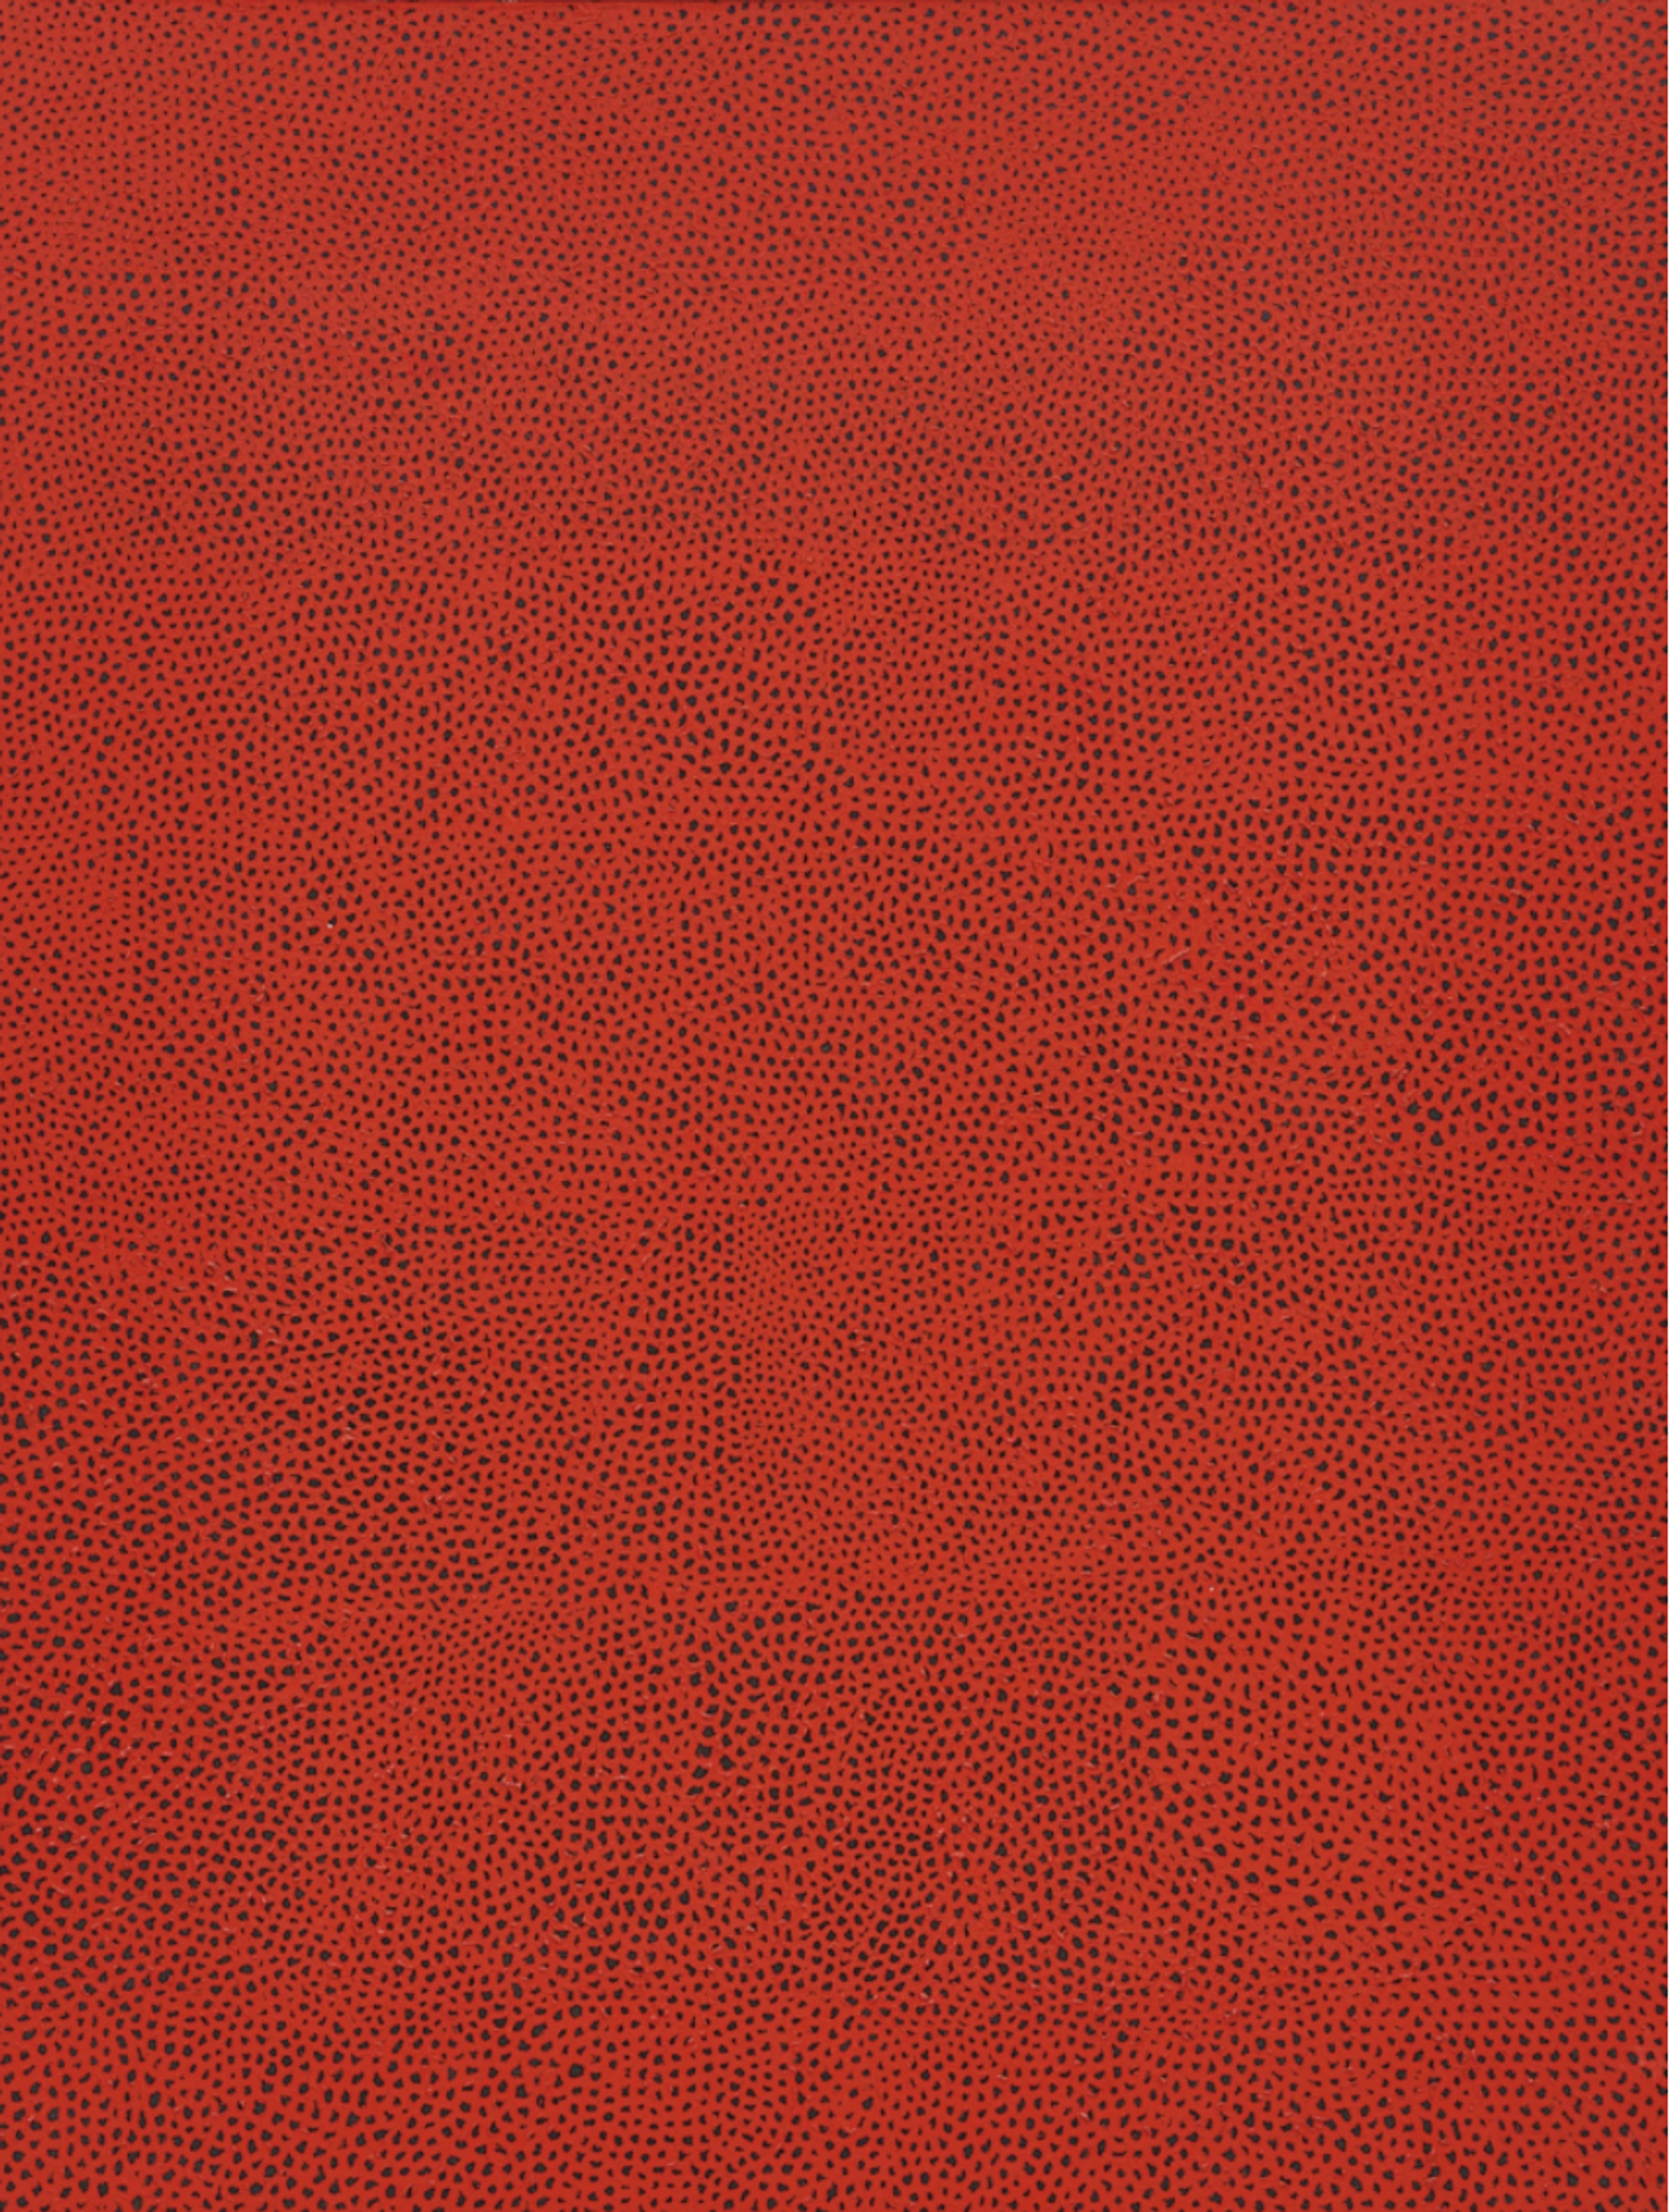 Kusama Works Sell for $23 M. at Sotheby's –